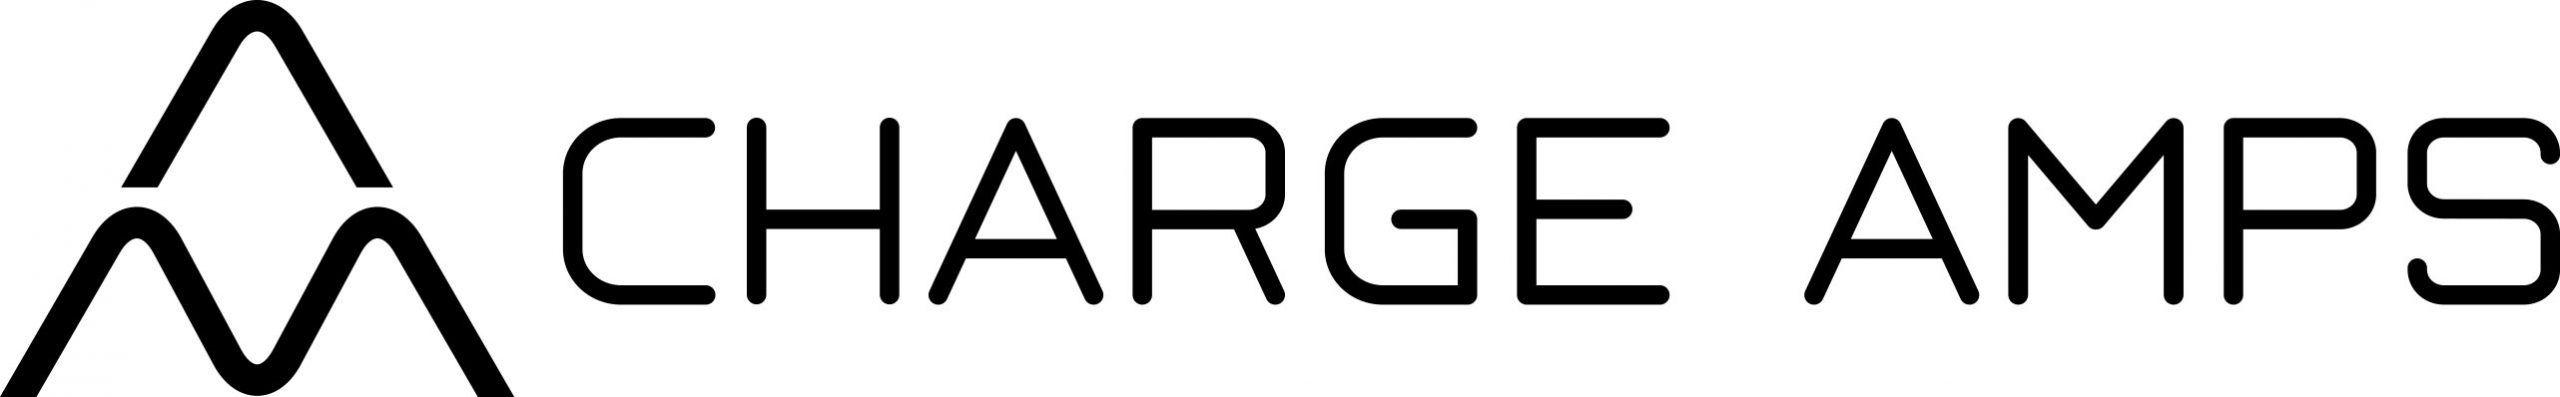 Logo Charge Amps